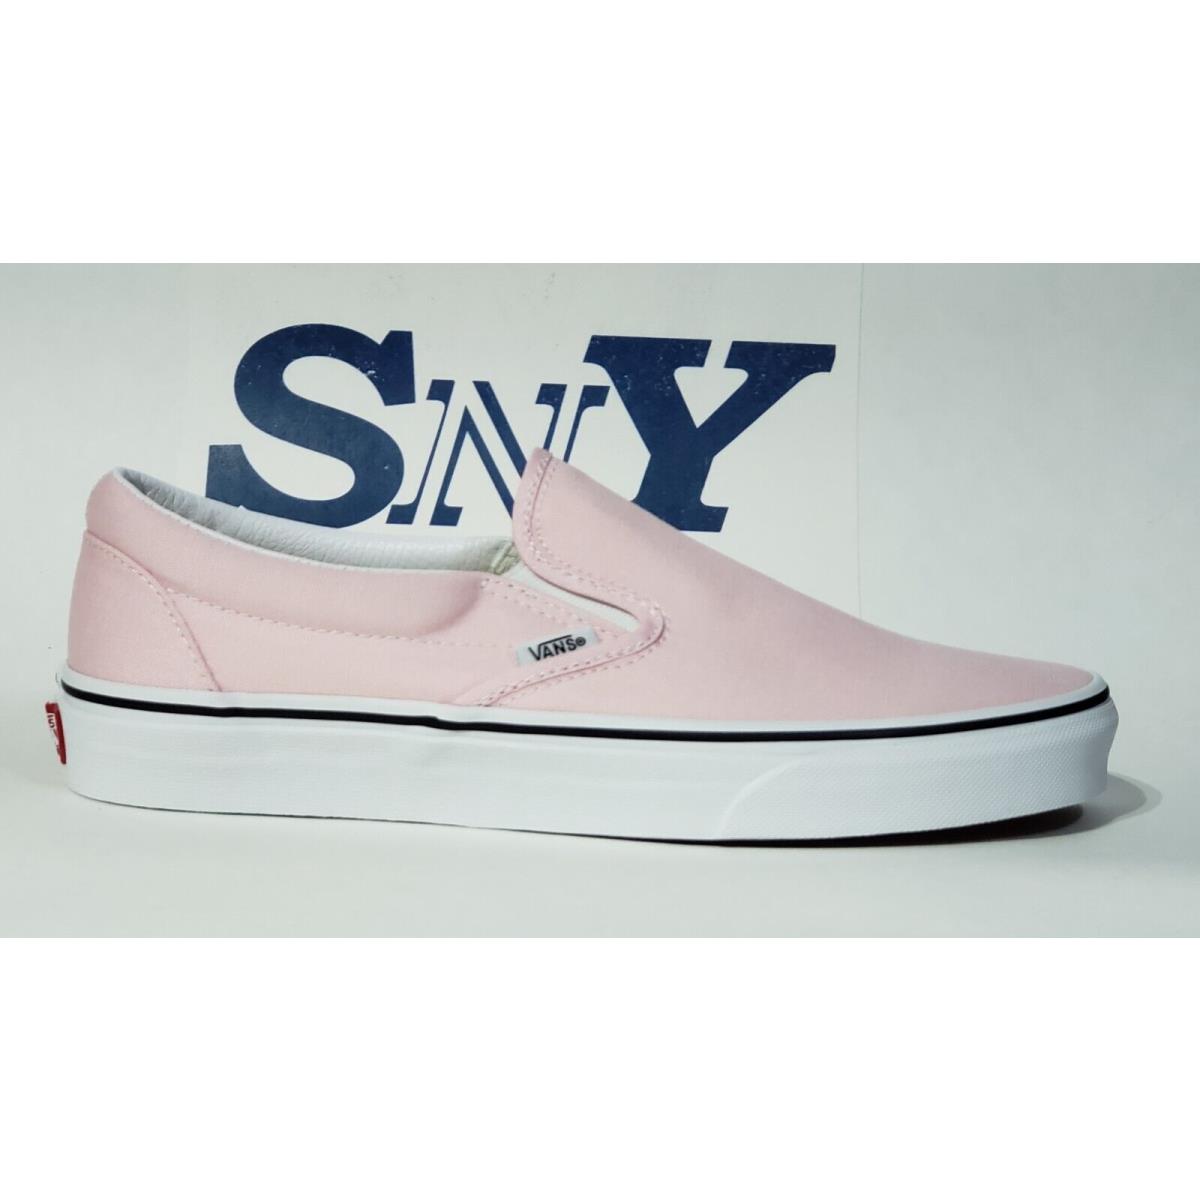 Vans Classic Slip-on Sneakers Rubber Outsole Canvas Upper Women`s Size 10 Blush